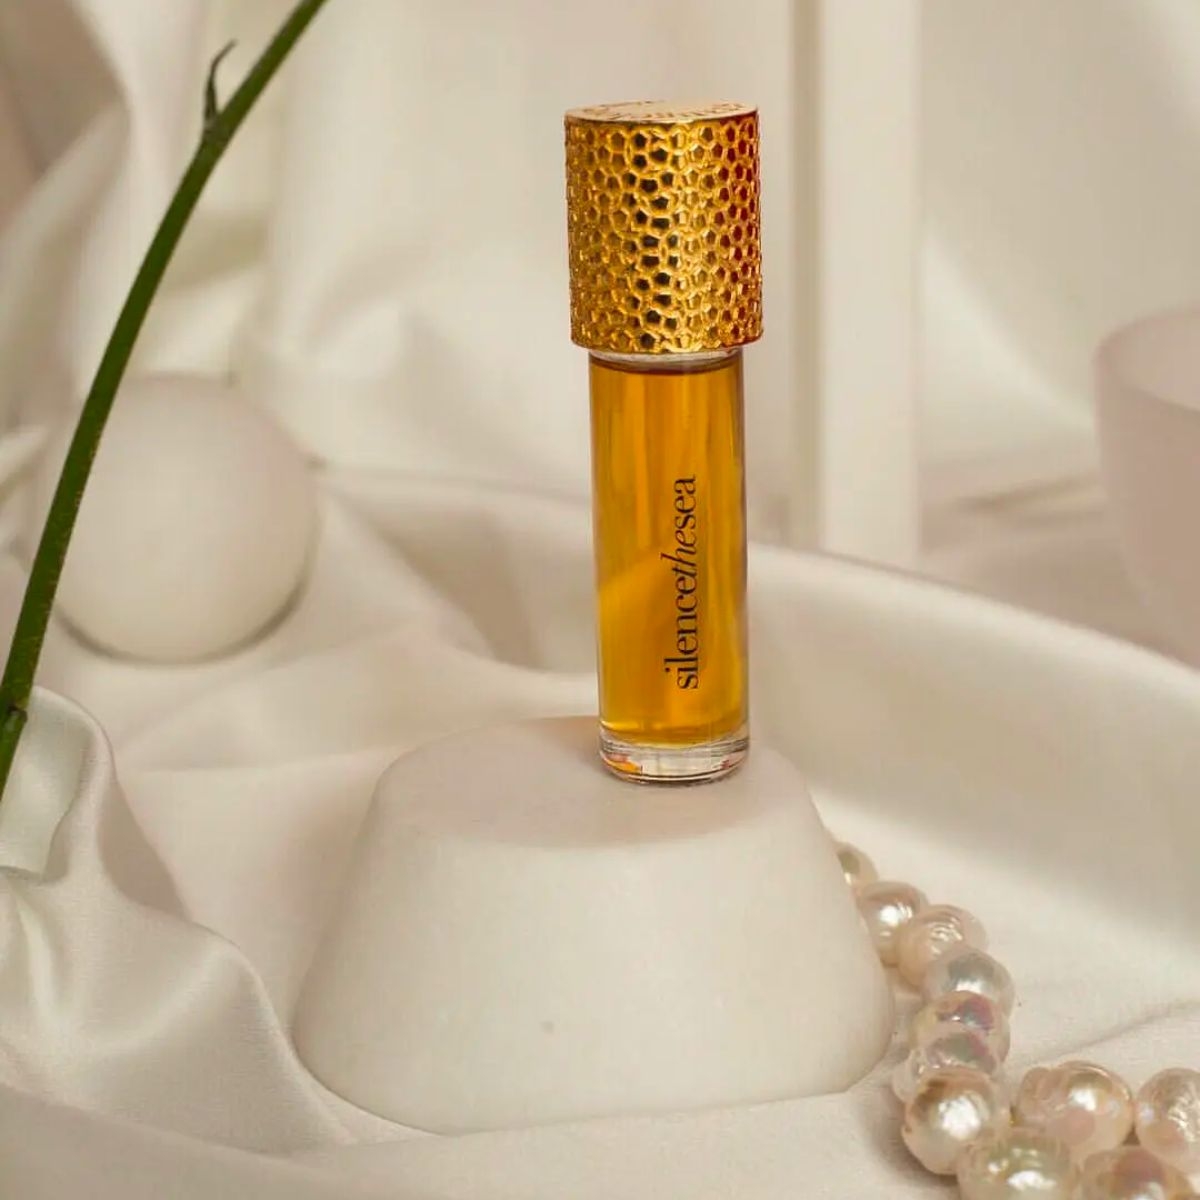 Image of silencethesea 10 ml perfume oil by the brand Strangelove